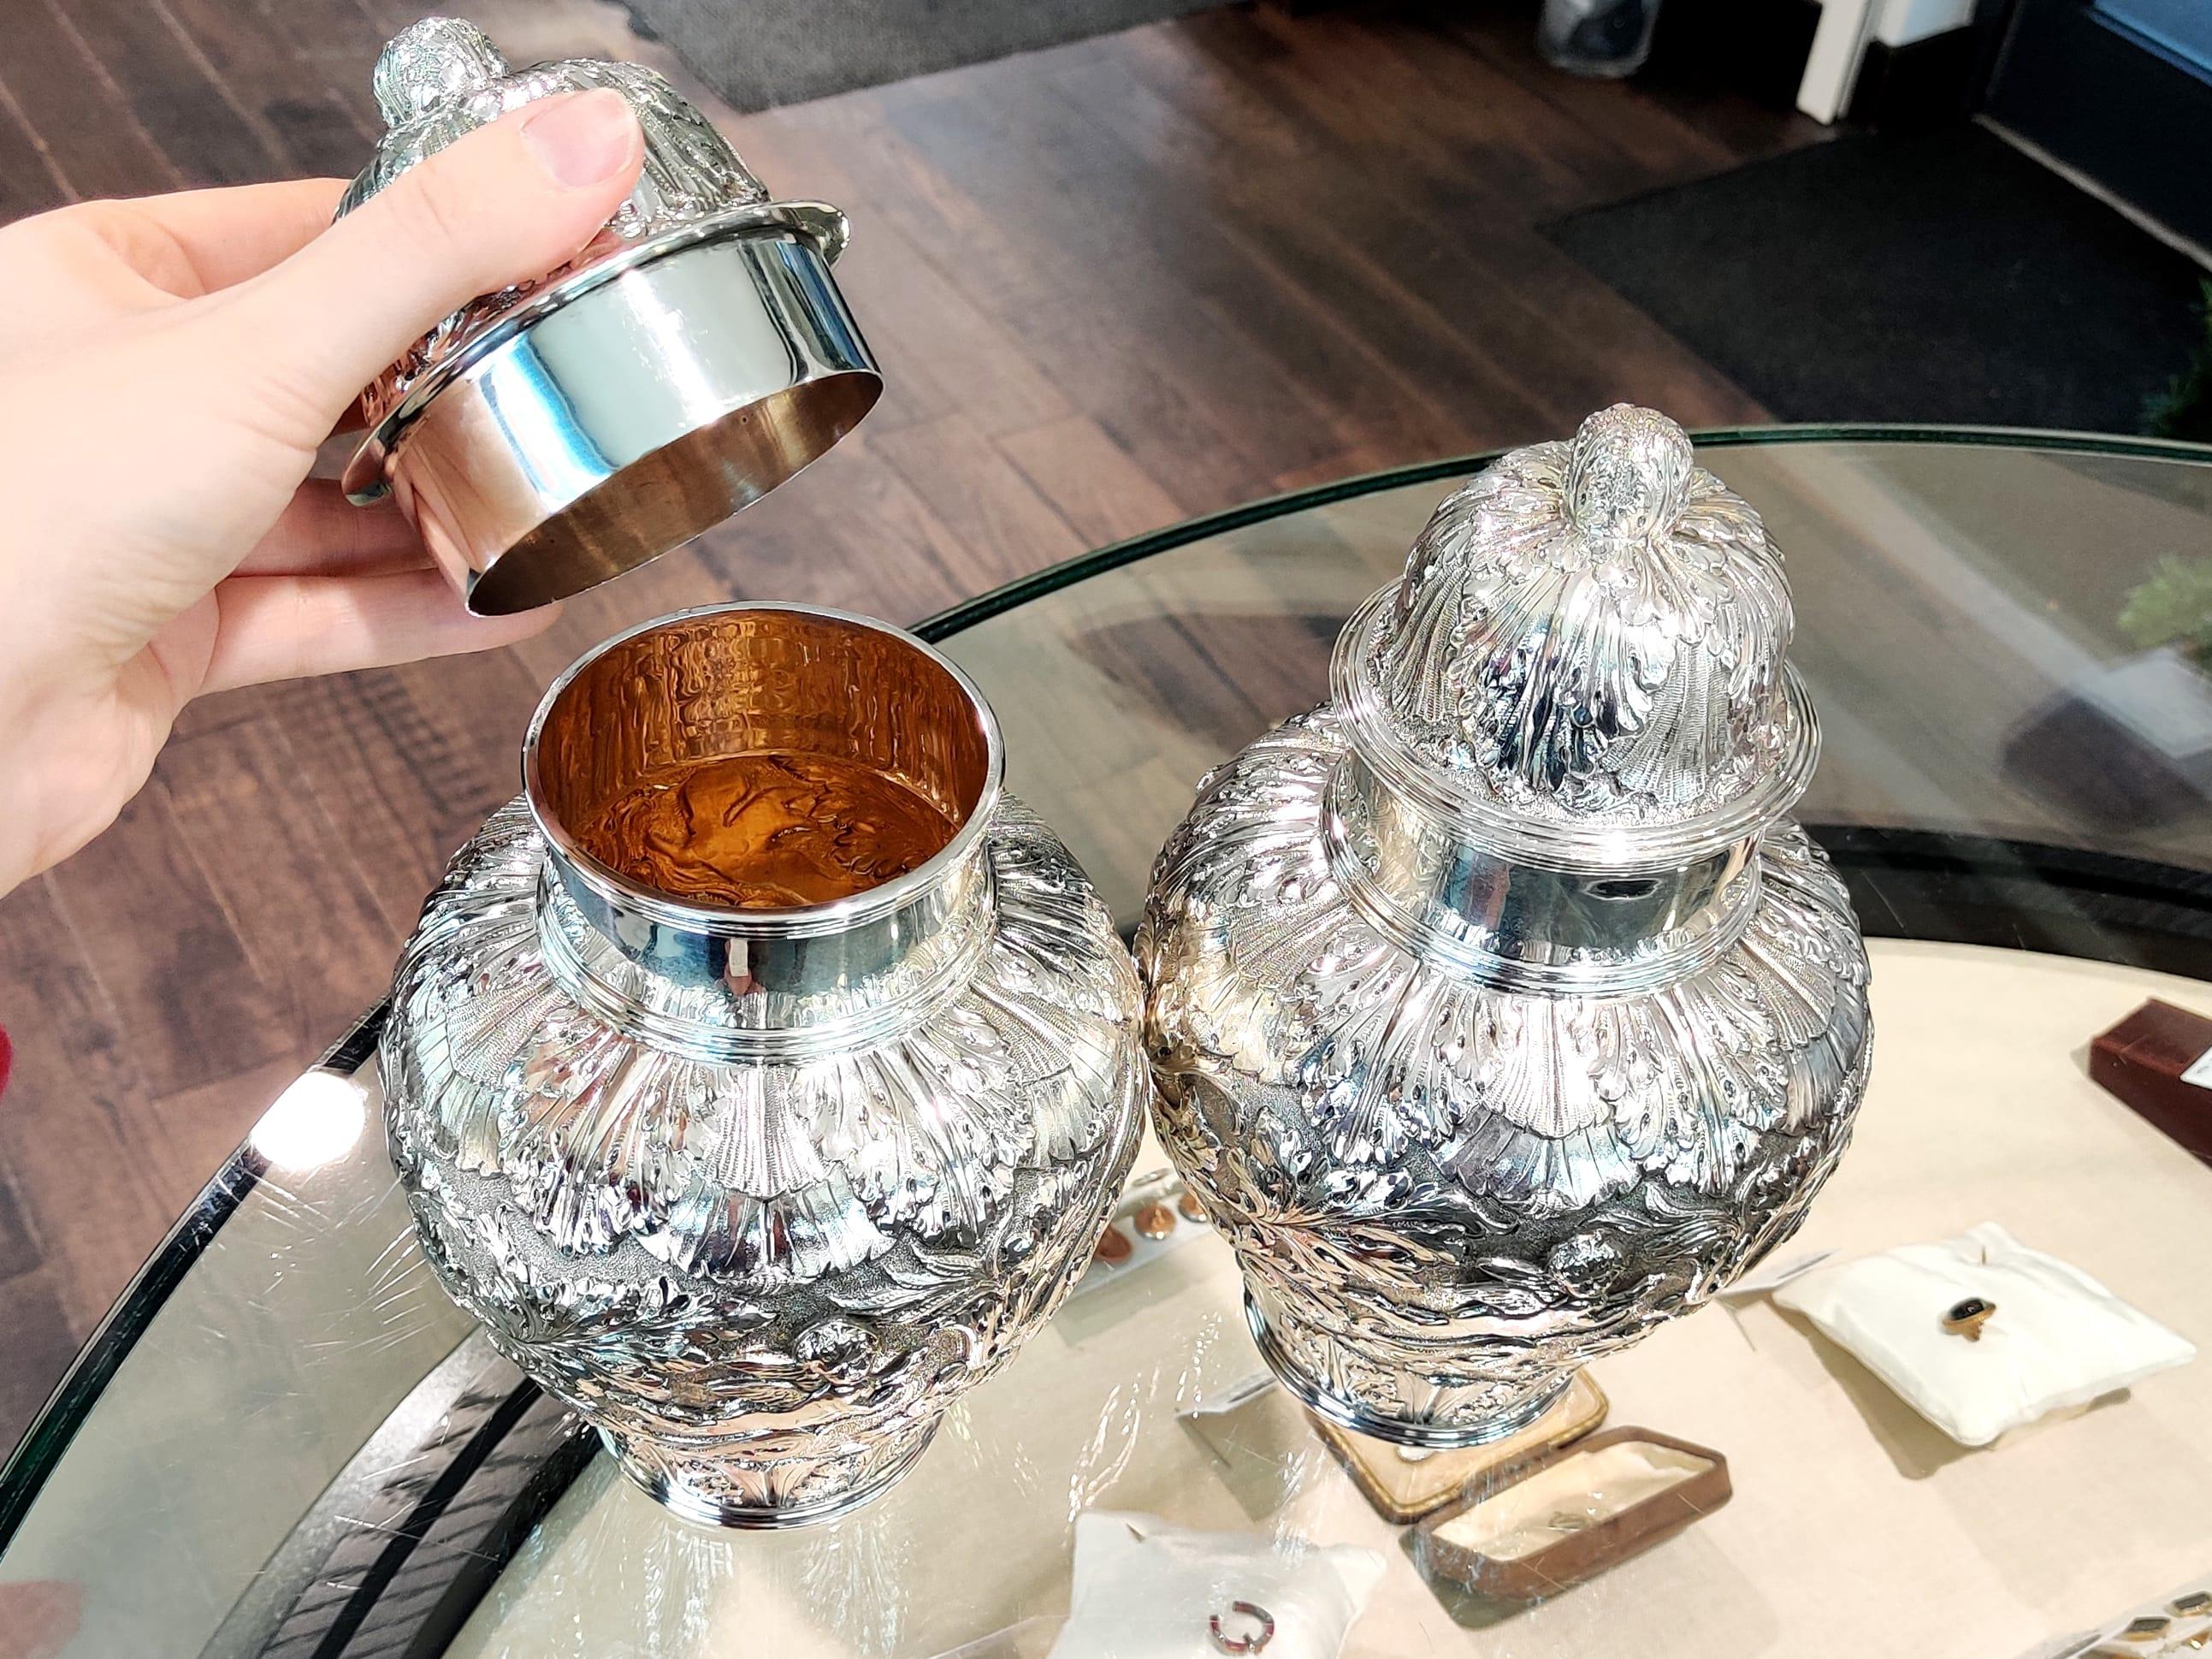 An exceptional, fine and impressive, large pair of antique George V English sterling silver ginger jars; an addition to our silver teaware collection

These exceptional, fine and impressive antique George V sterling silver tea caddies have a